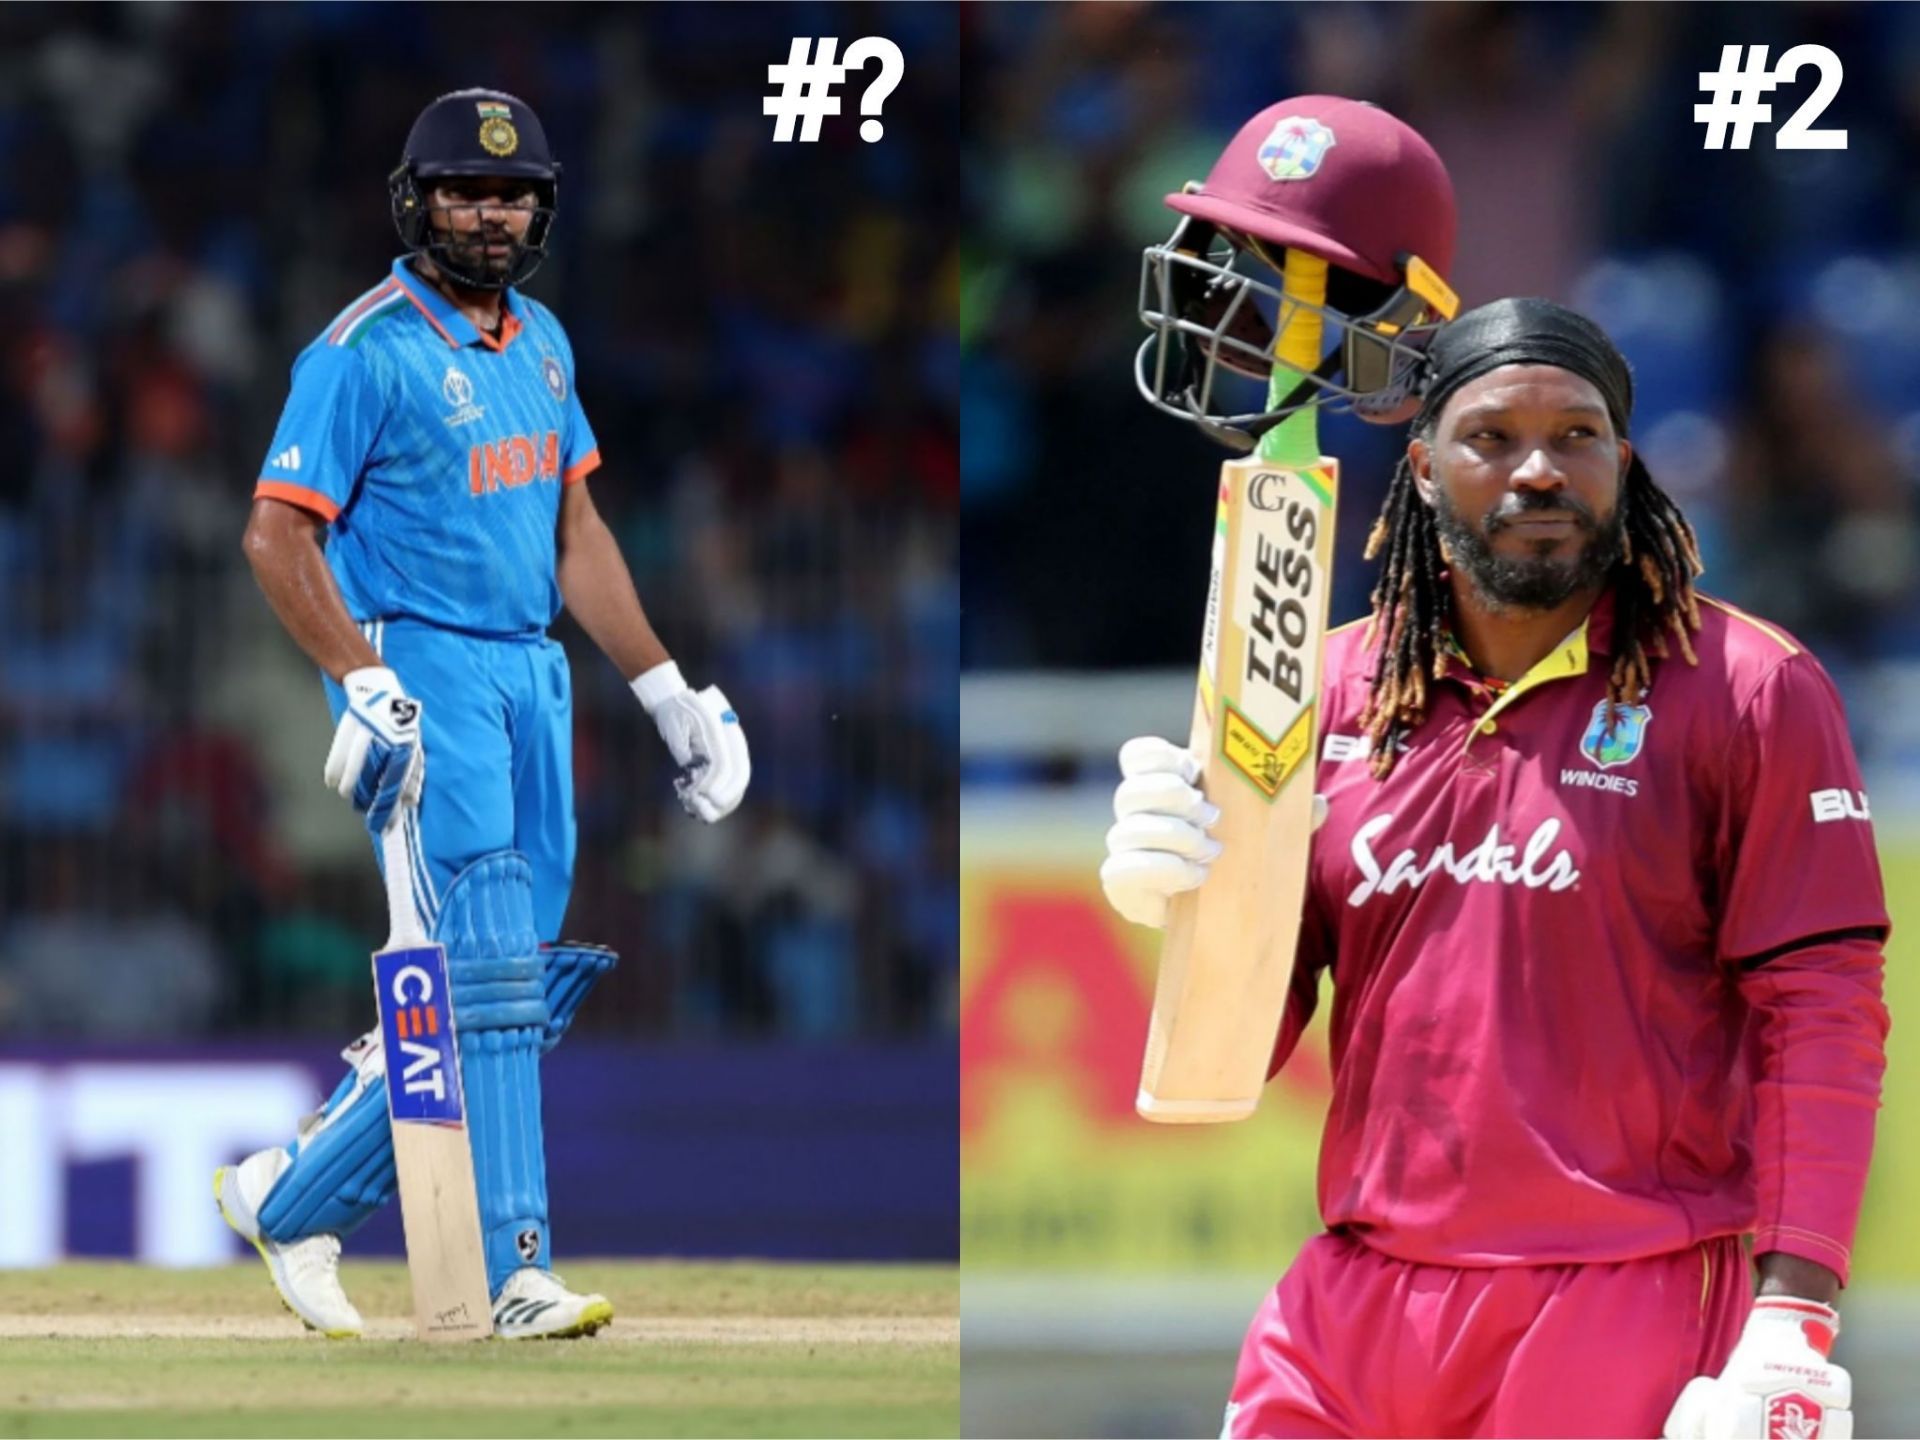 3 fastest players to hit 300 ODI sixes [Getty Images]